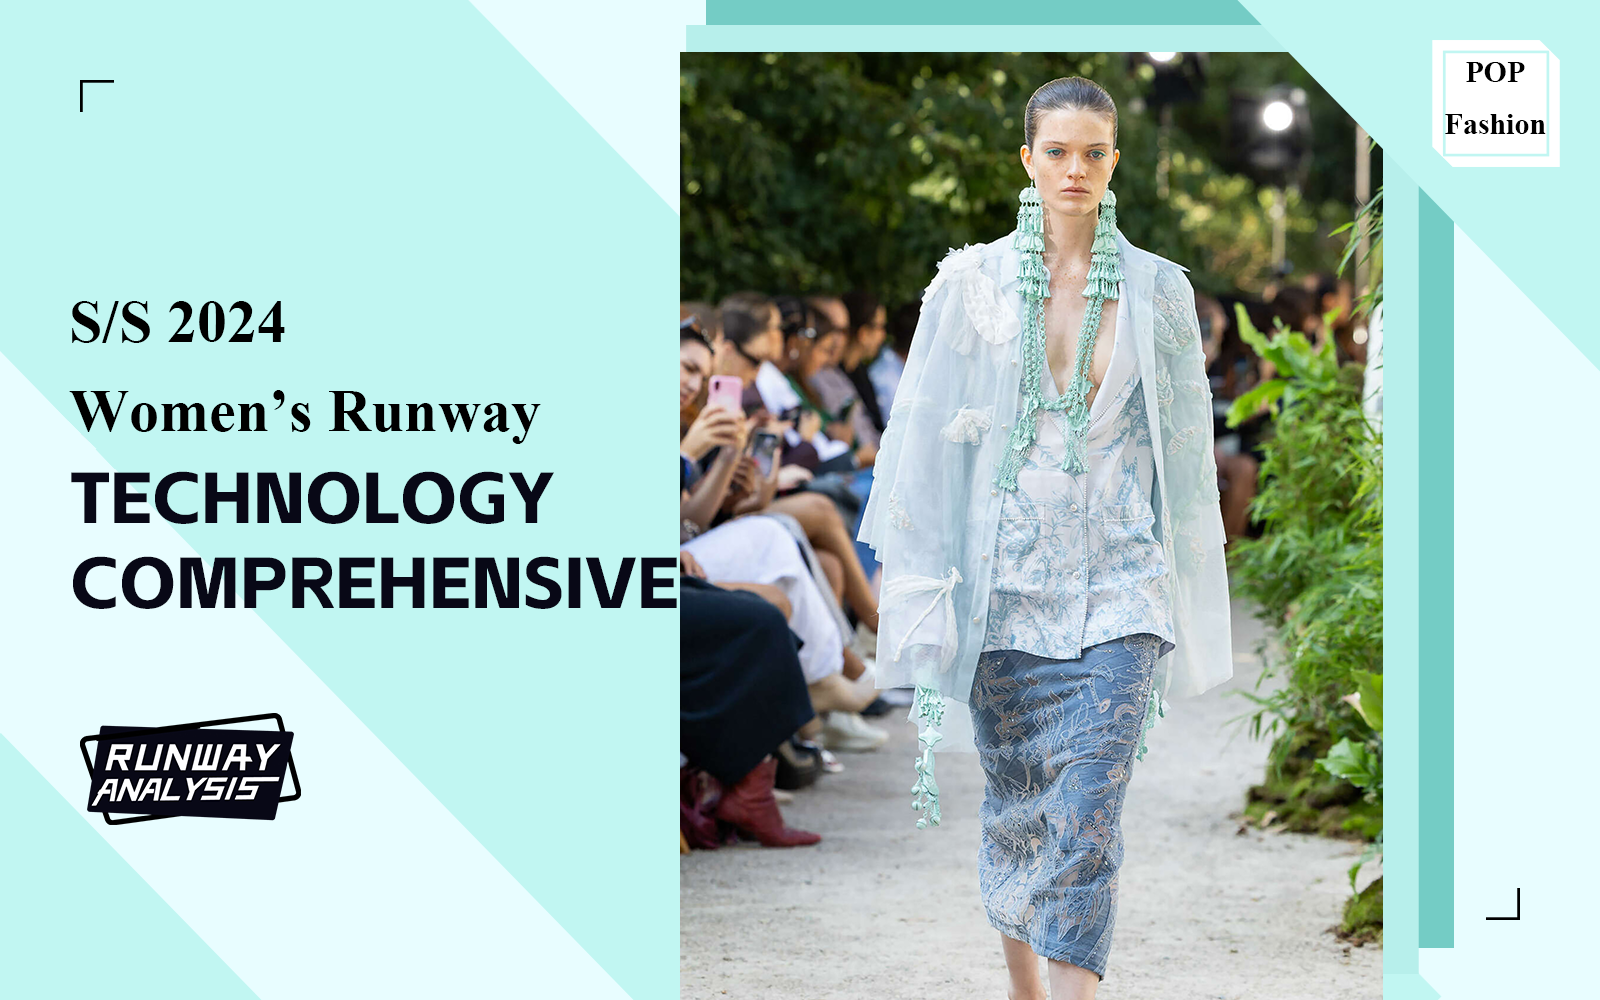 S/S 2024 Comprehensive Analysis of Women's Ready-to-wear Runway